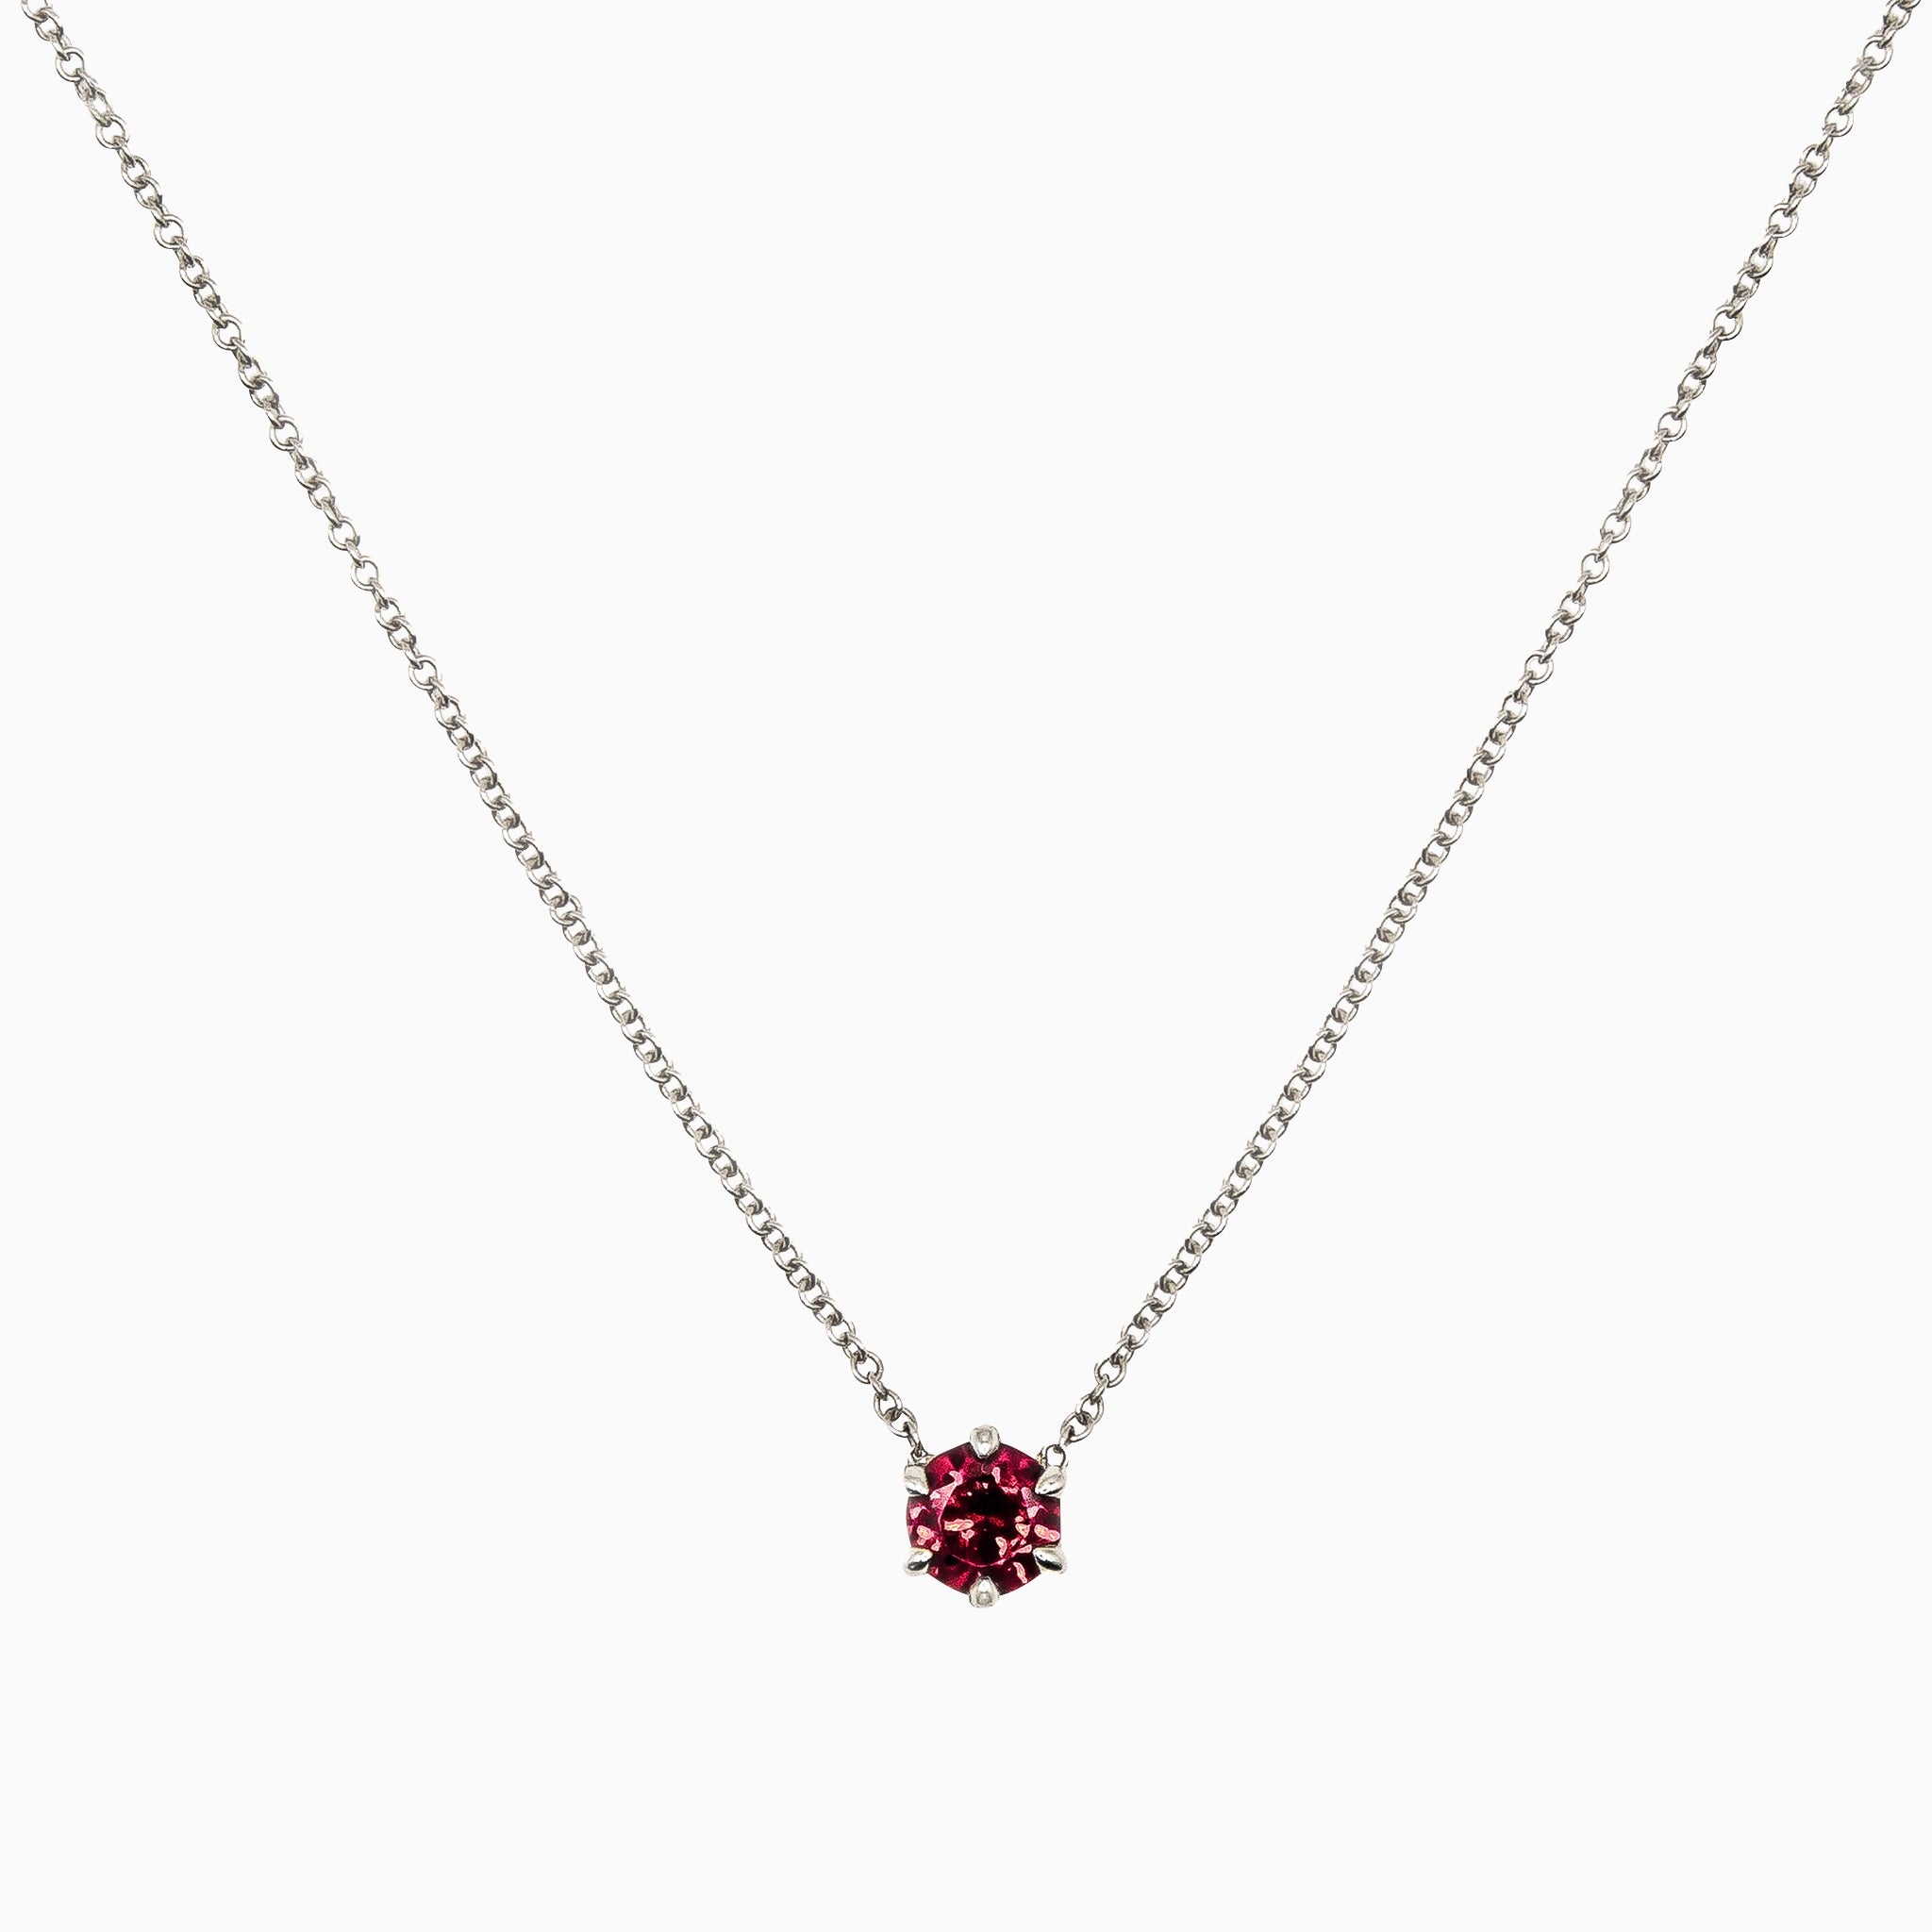 14k White Gold Claw Prong Garnet Necklace